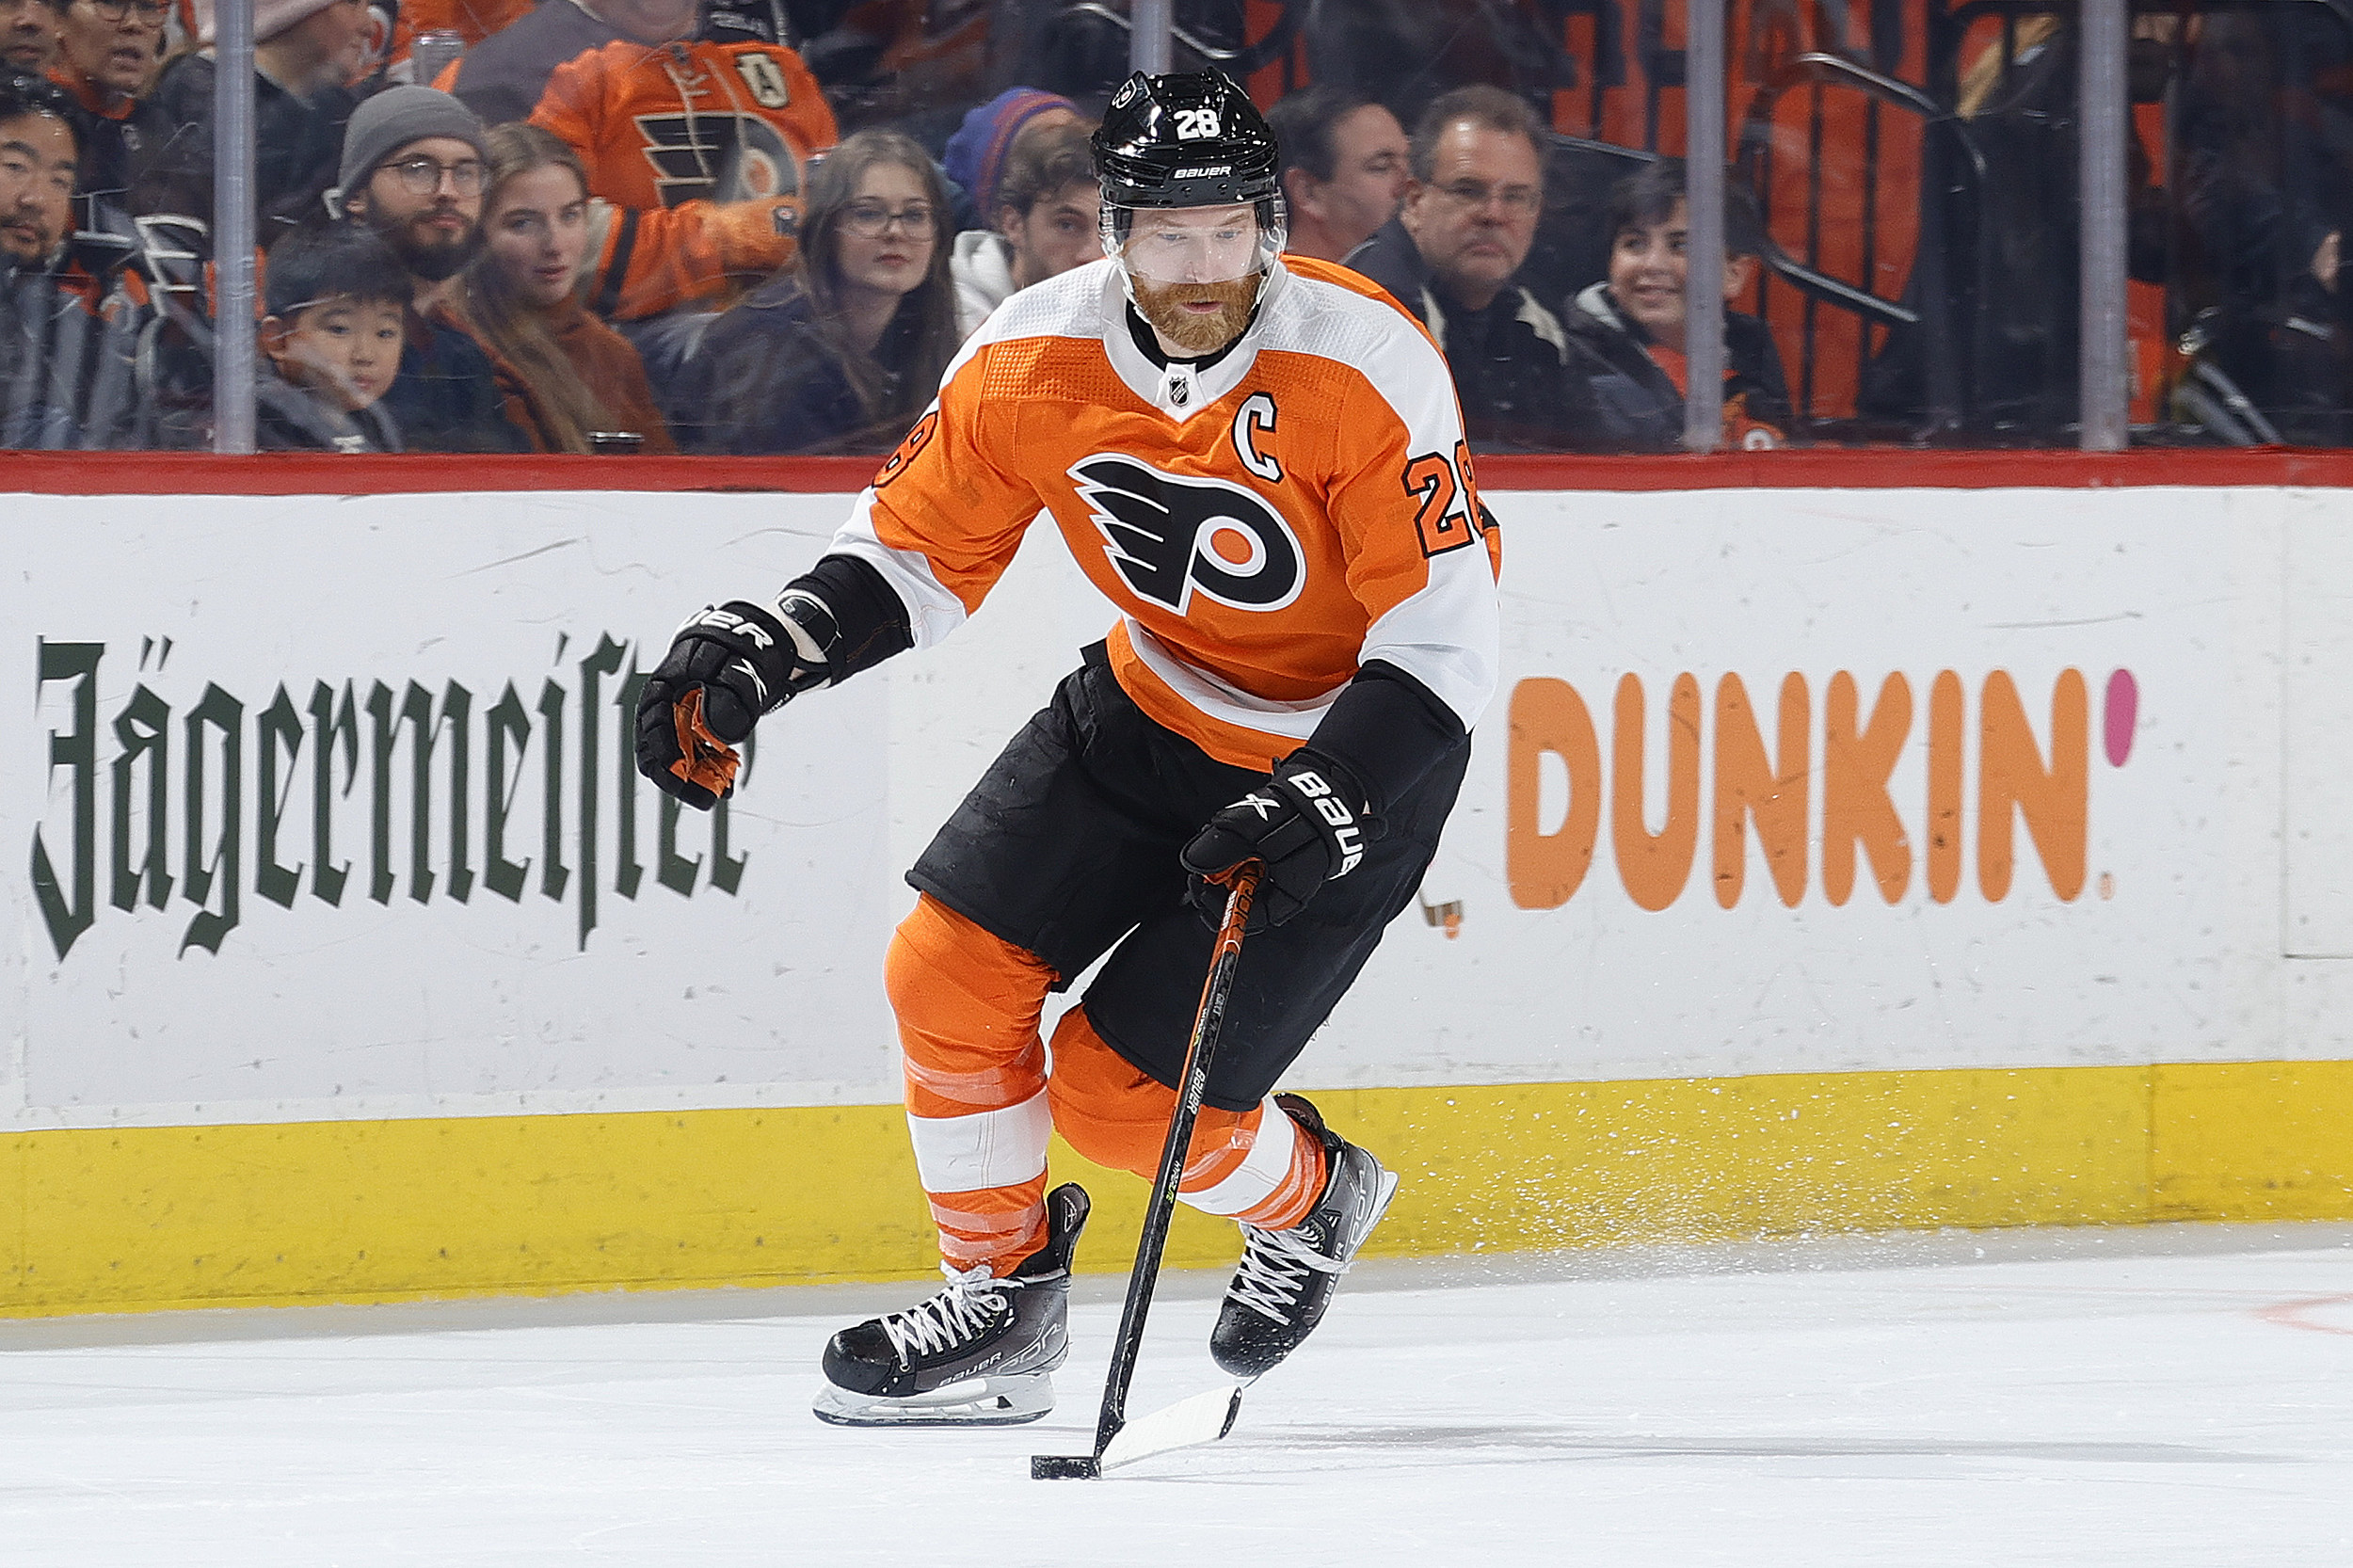 Flyers Wear Patch to Honour Claude Giroux's 1000th Game